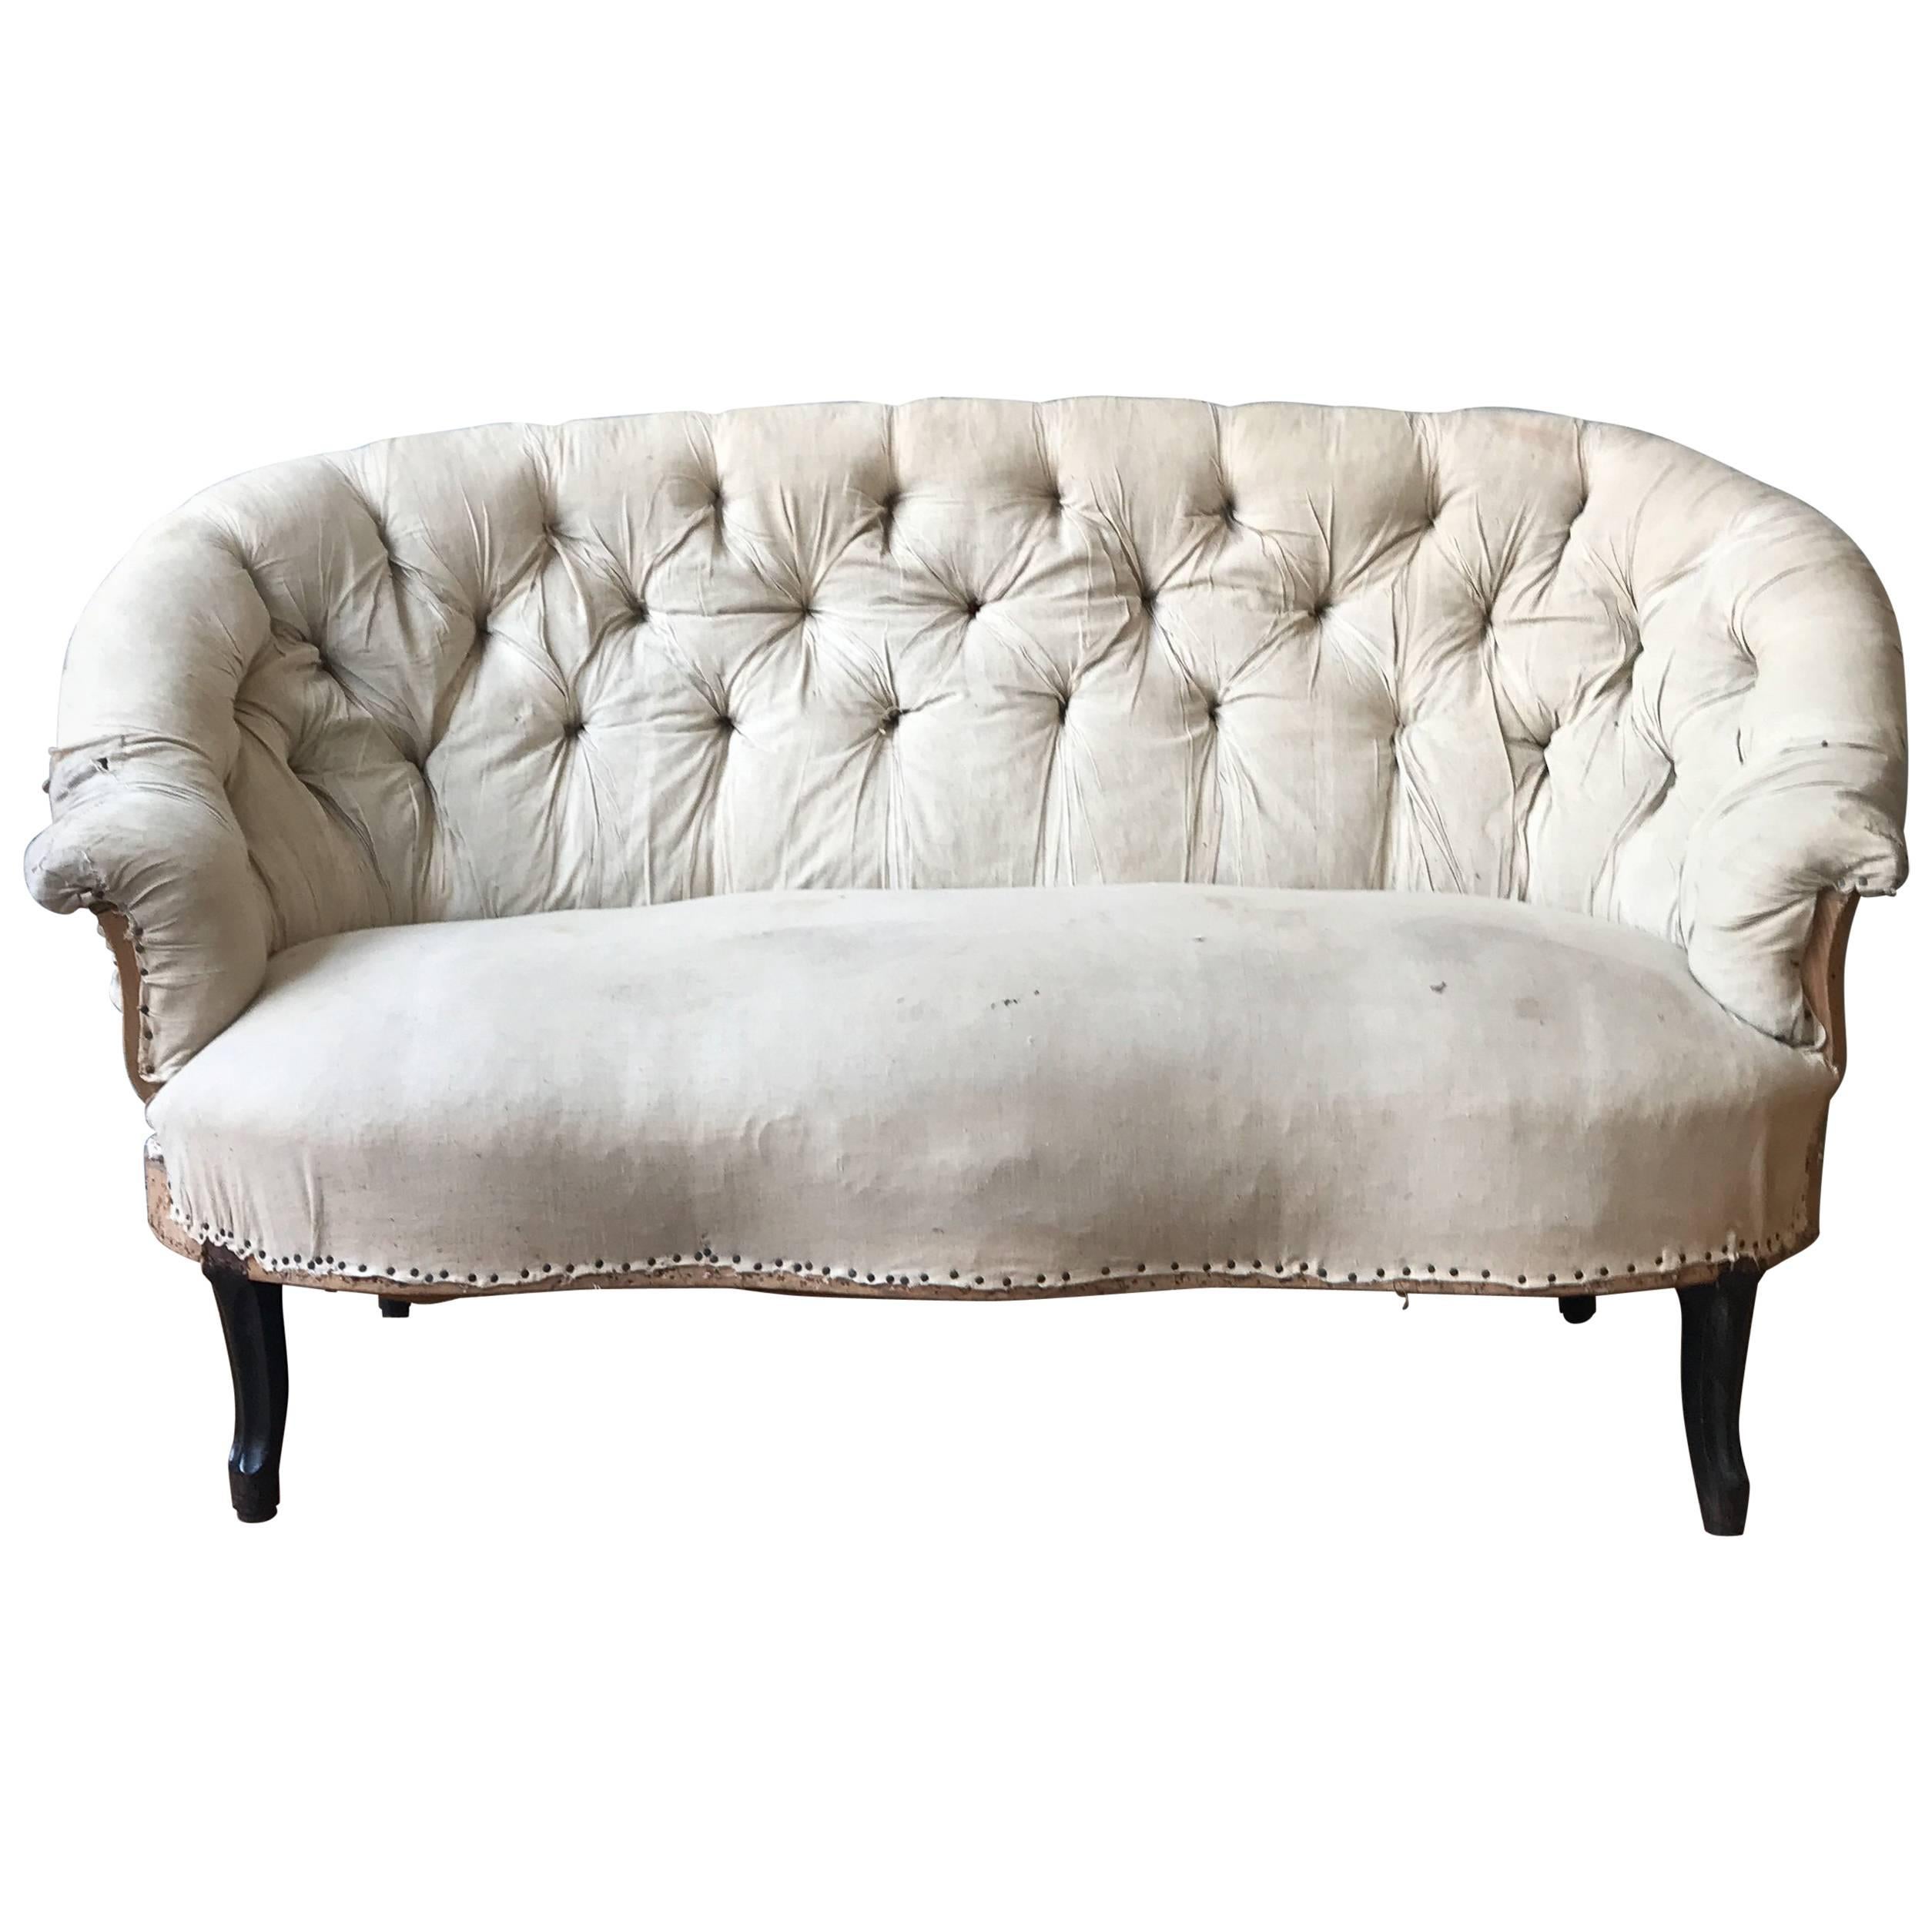 Small French Settee with Tufted Back and Cabriole Legs